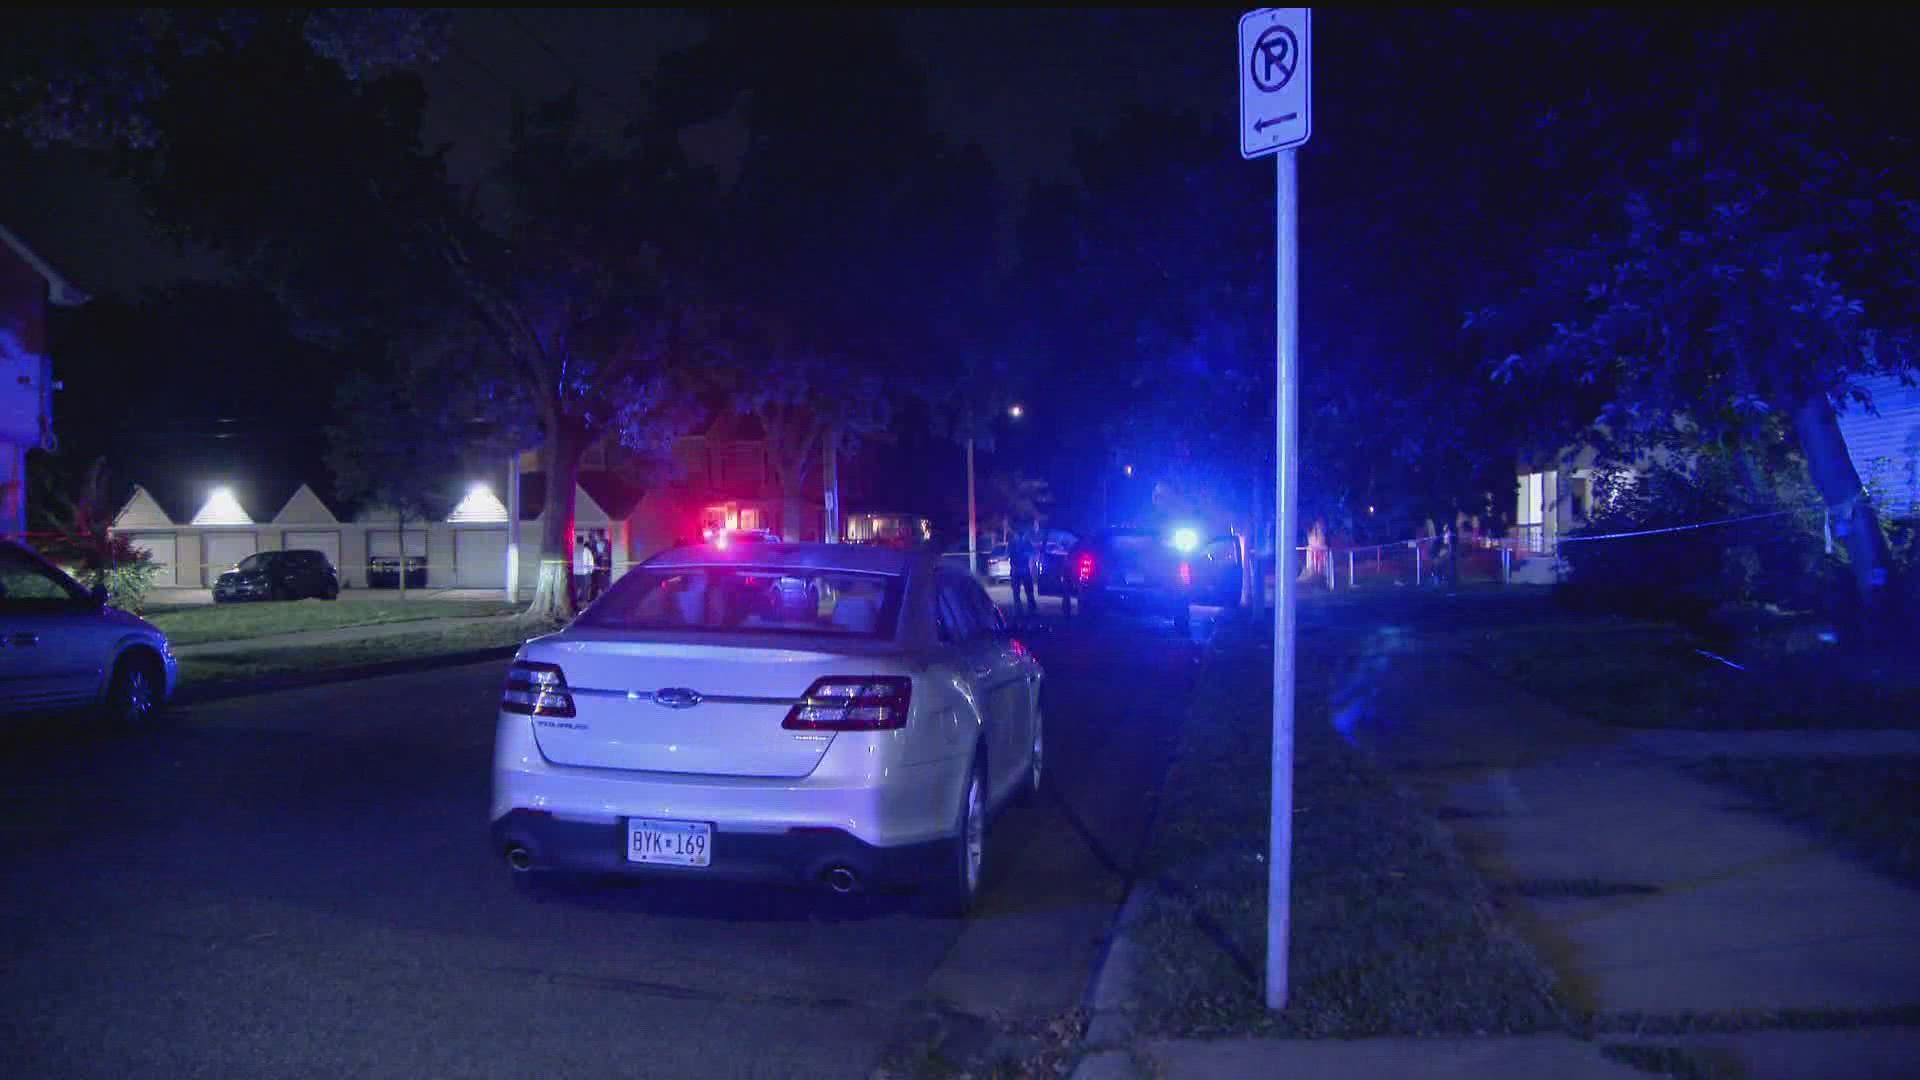 Police say they're investigating after a teenager was shot and killed Thursday night in north Minneapolis.